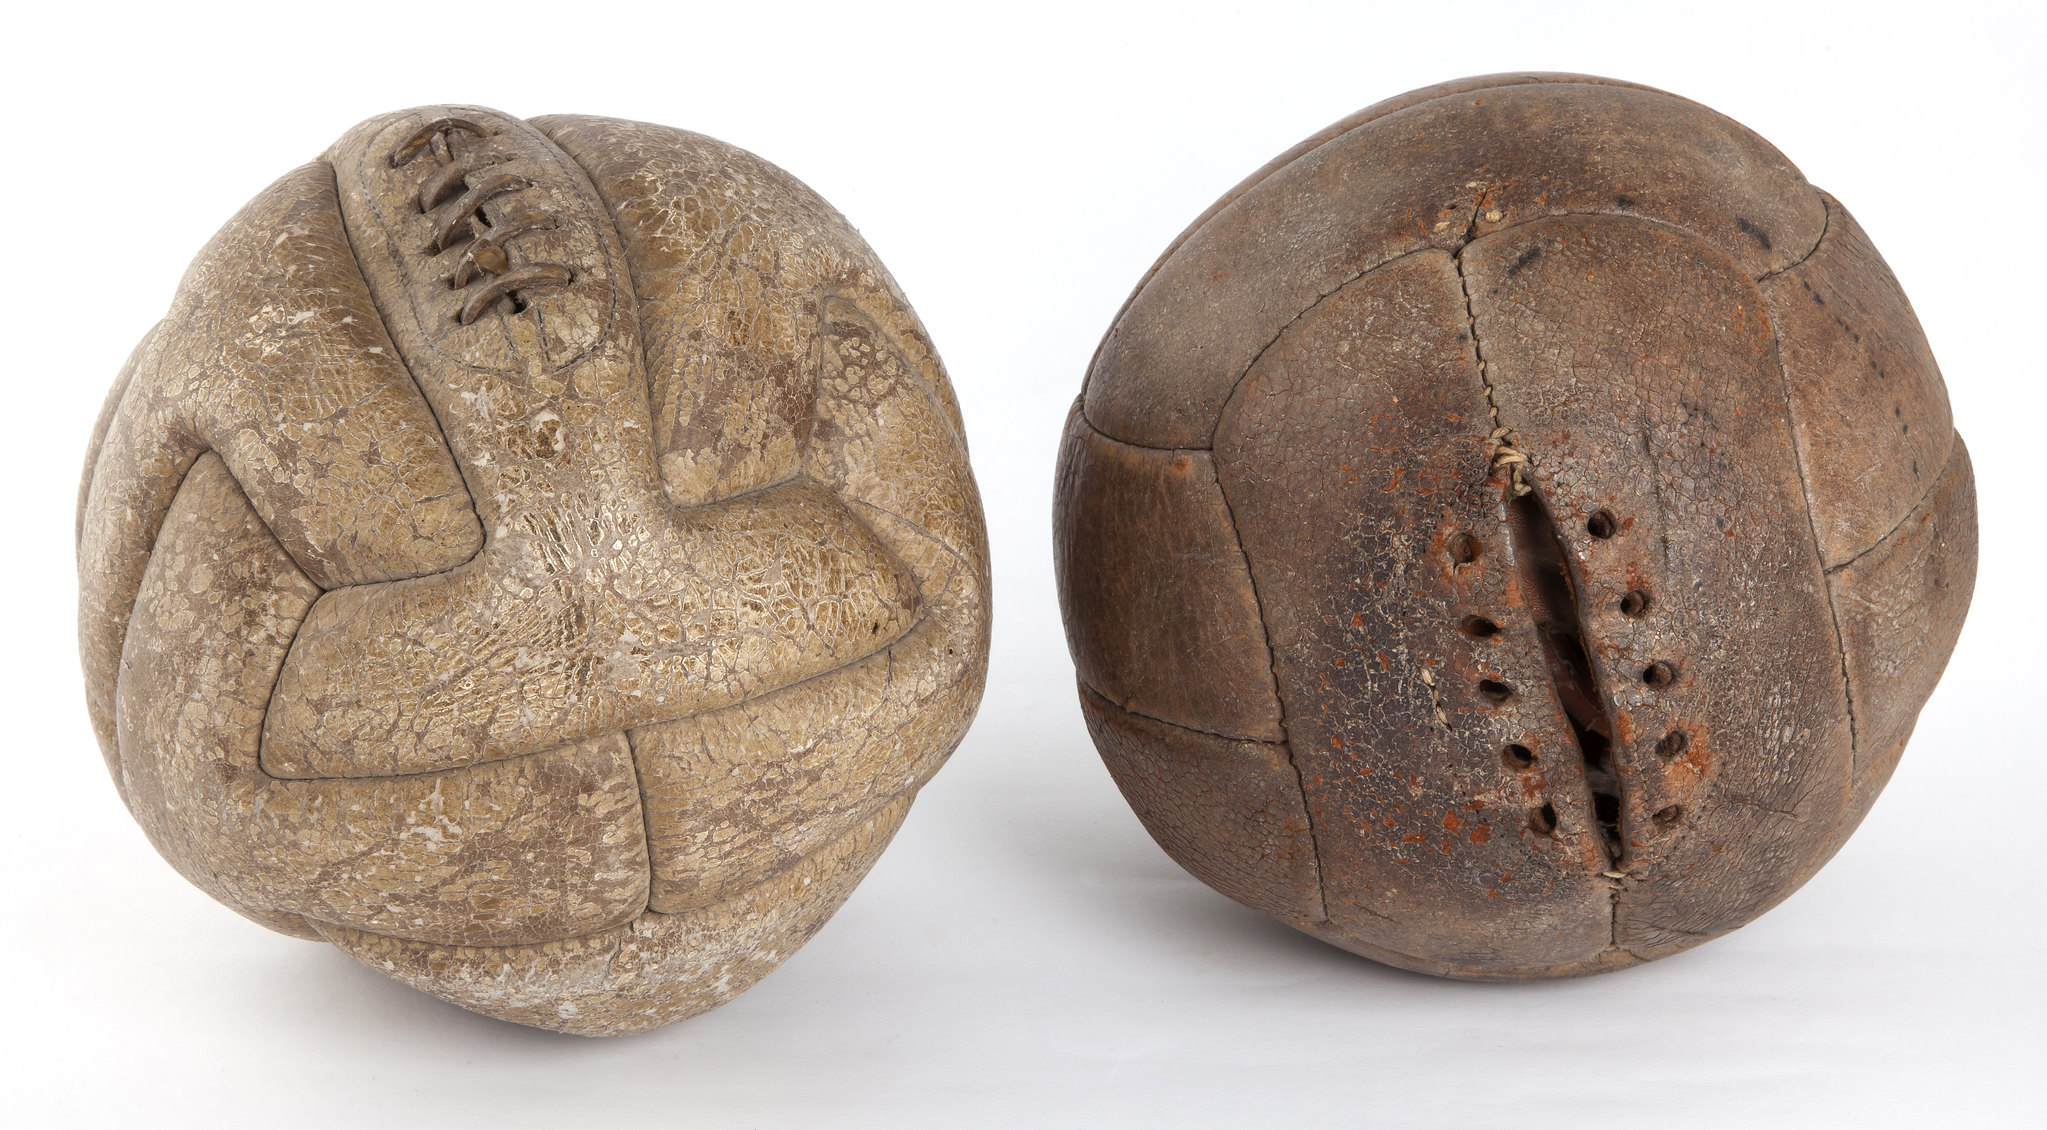 Nat. Football Museum on Twitter: "Two balls, one final. ⚽⚽ At the 1930  @FIFAWorldCup Final, neither side could agree on who should supply the  match ball - so FIFA insisted on playing